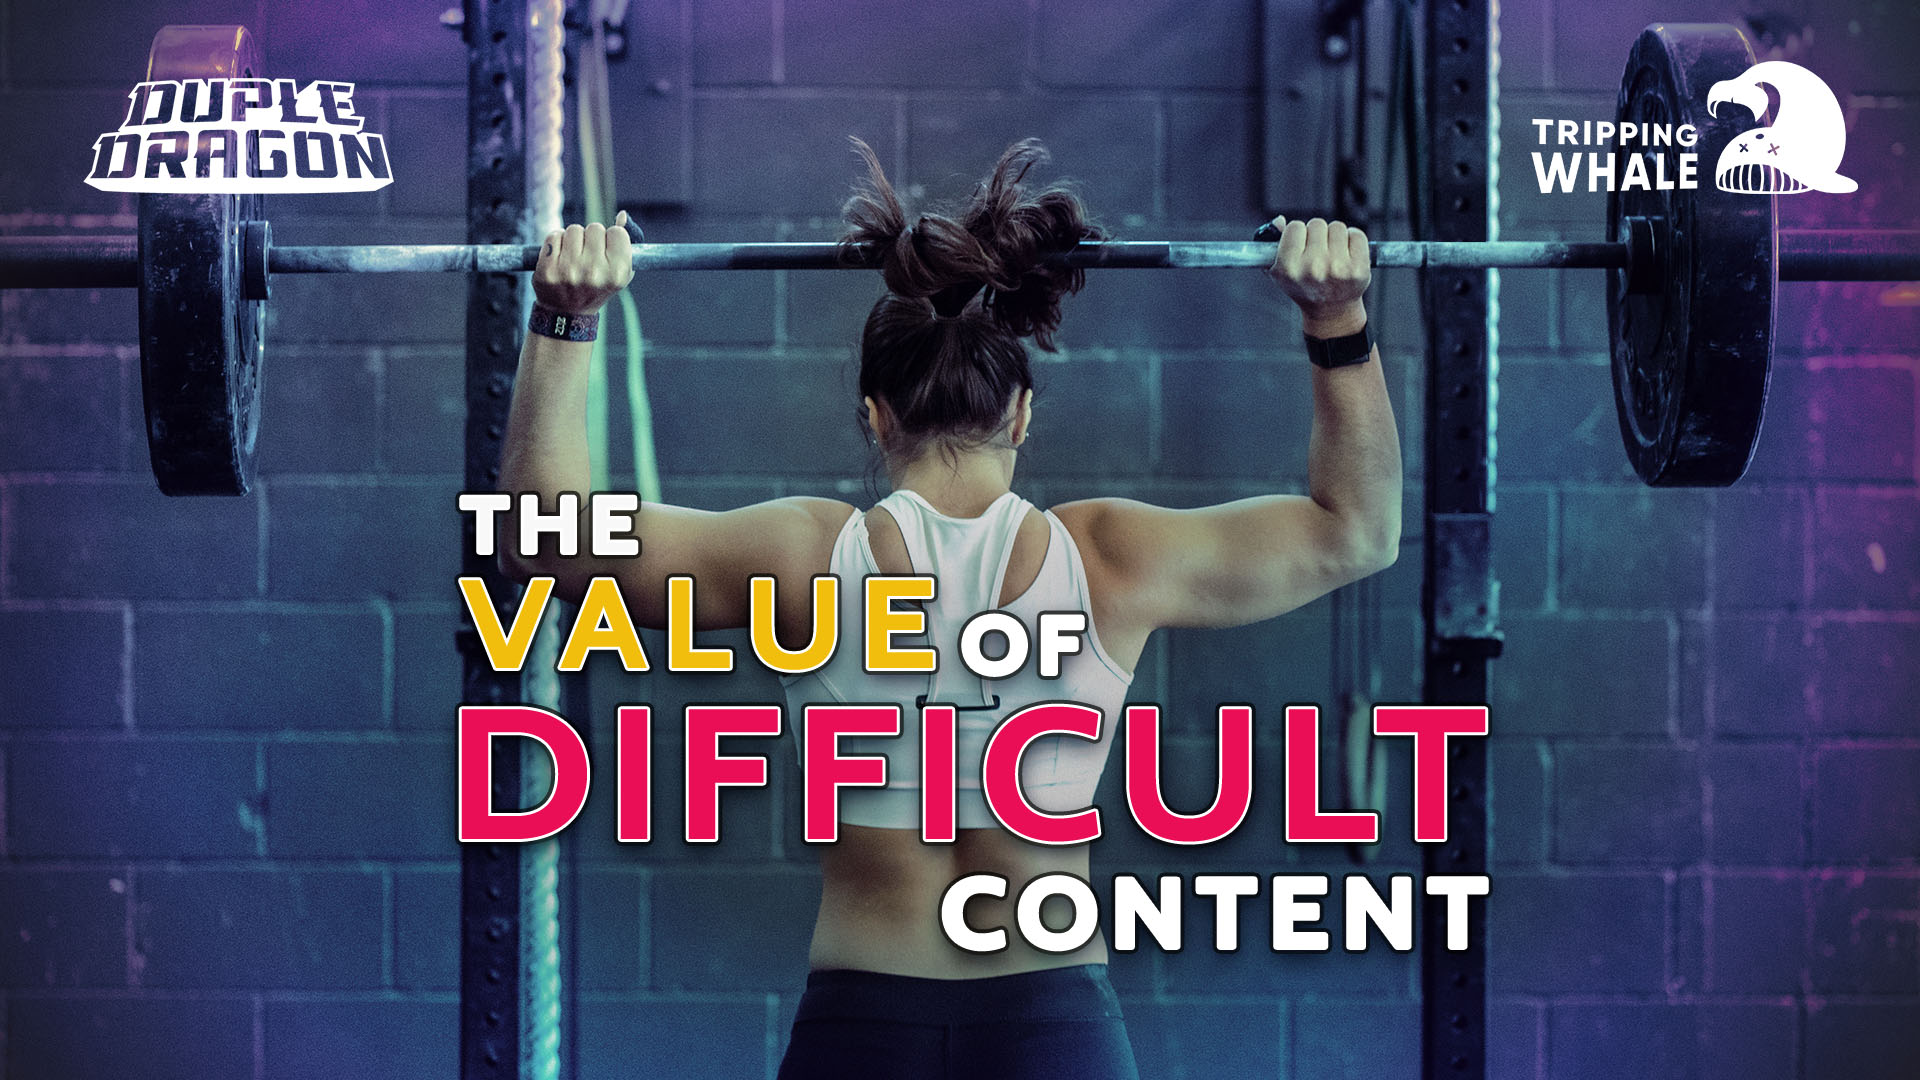 The Value of Difficult Content